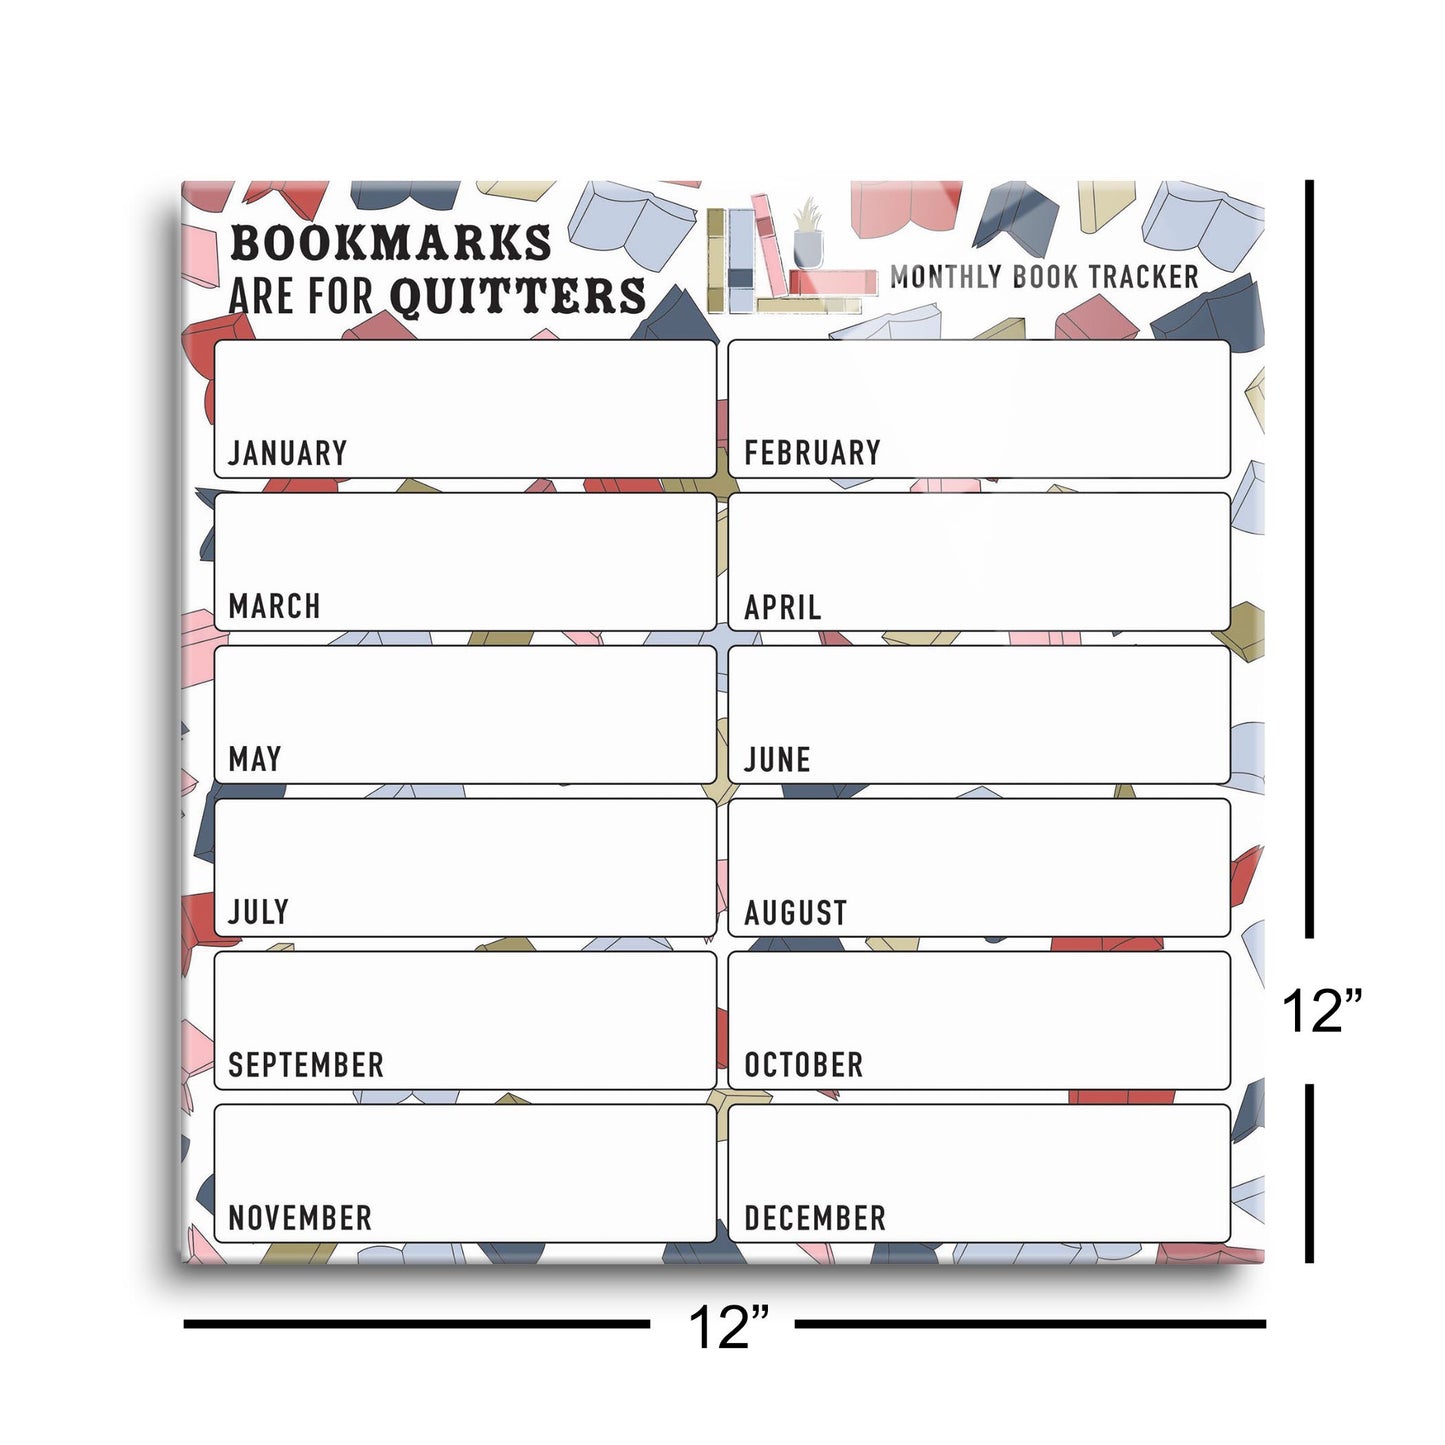 Yearly Book Tracker Bookmarks are for Quitters | 12x12